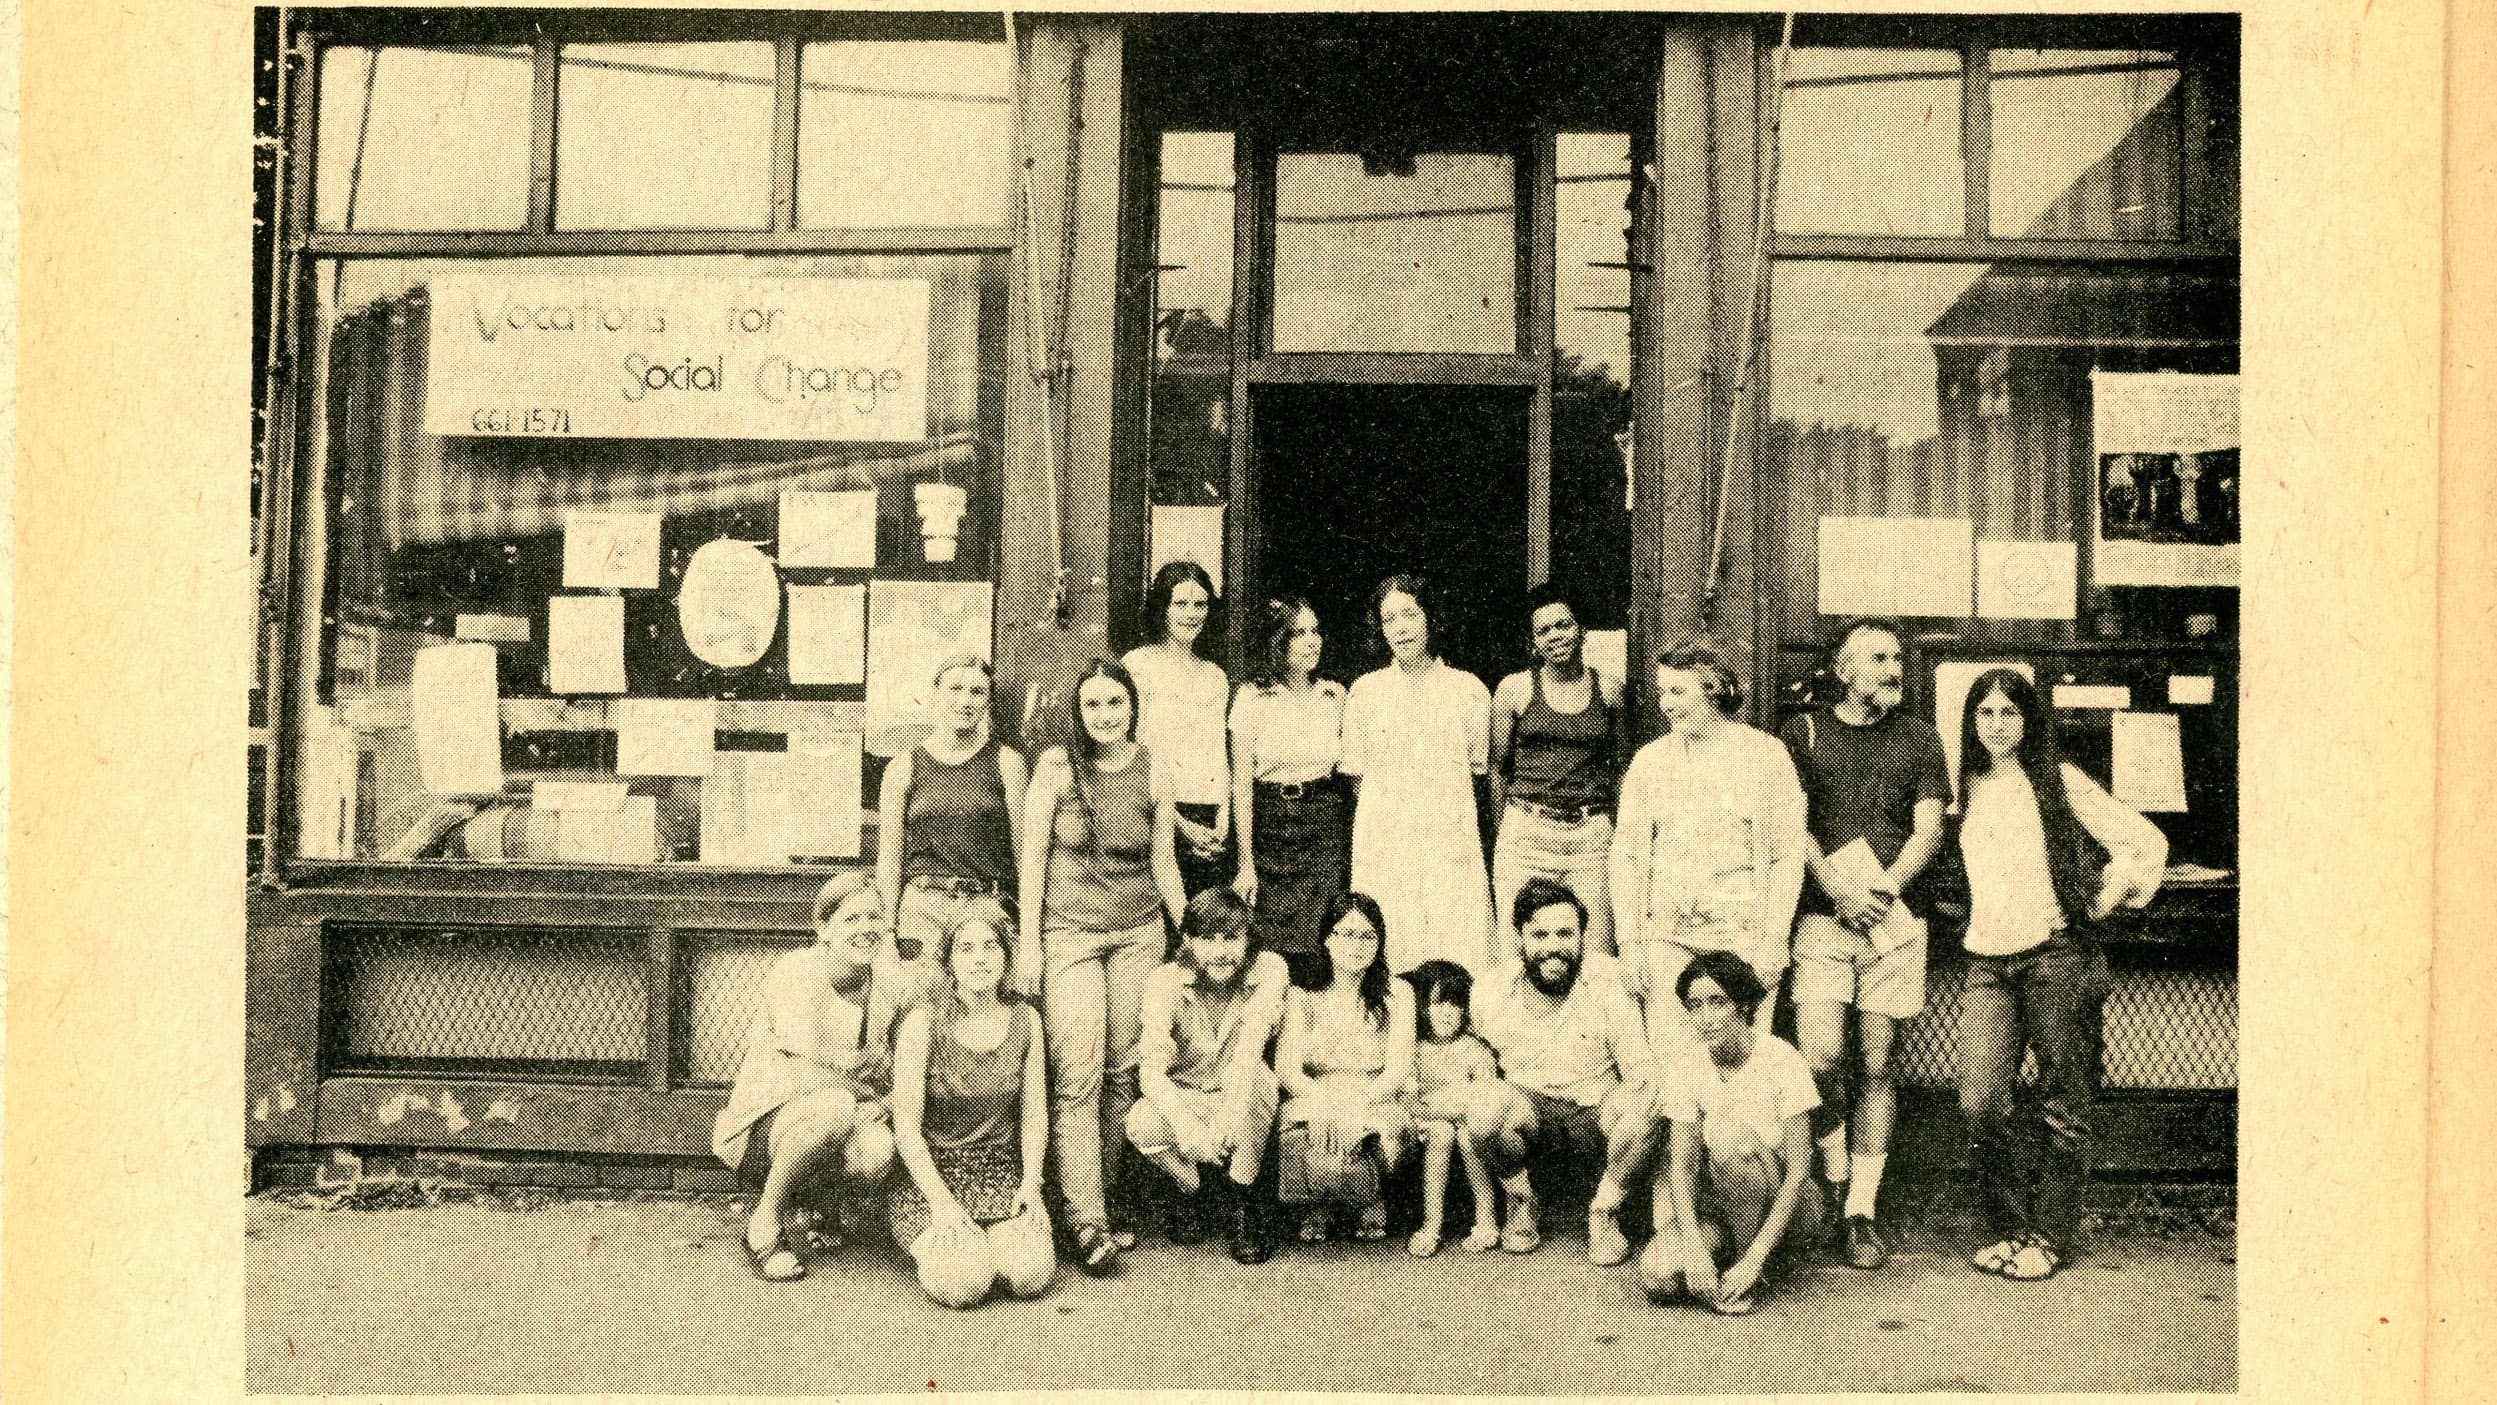 A photo from the 1976 edition of the People's Yellow Pages shows the publication's volunteers assembled before the Vocations for Social Change office in Cambridge. (Courtesy Shelley Rotner)